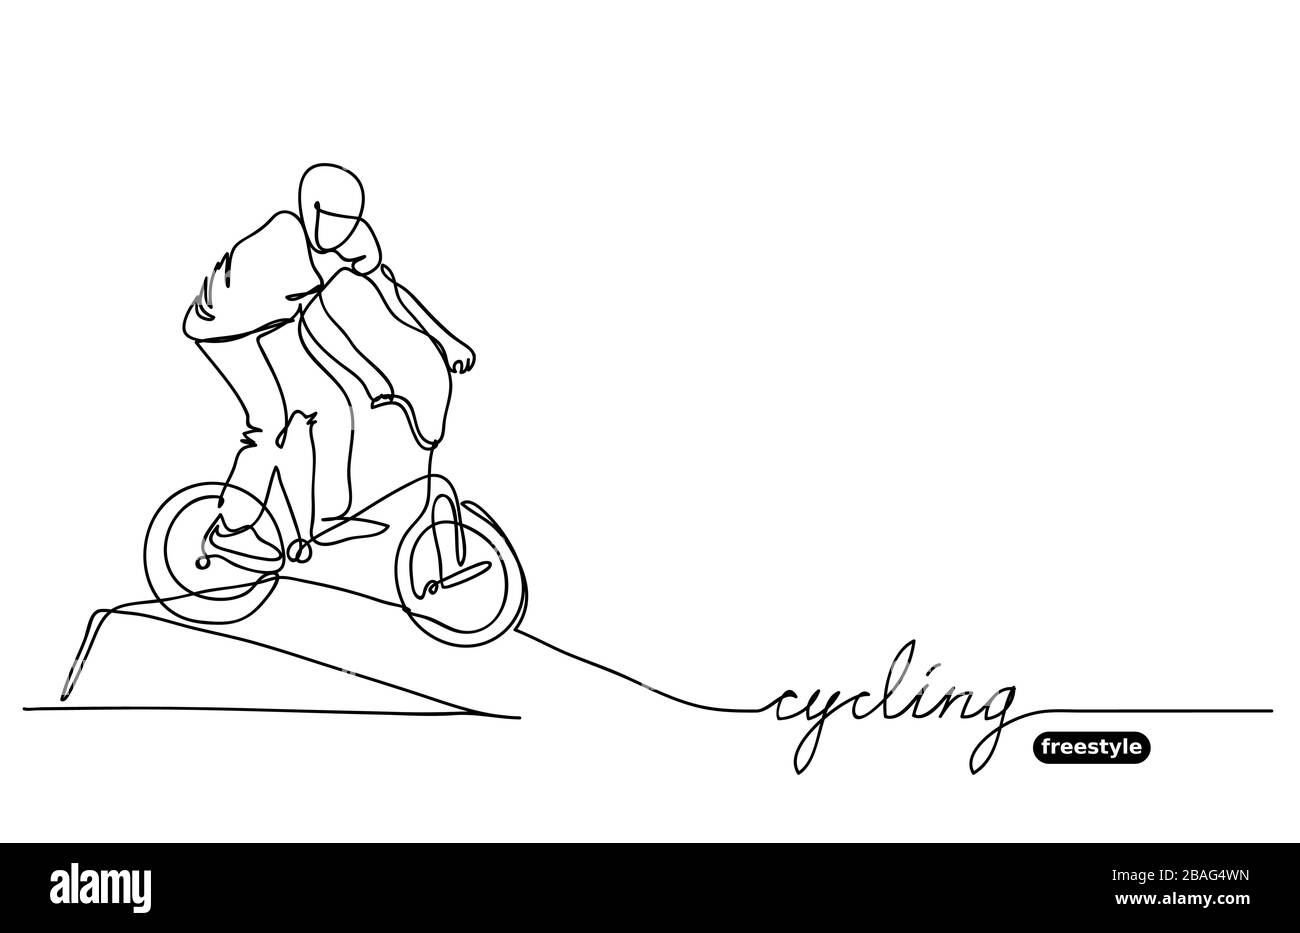 Freestyle BMX cycling Vector sketch, doodle Illustrazione Vettoriale